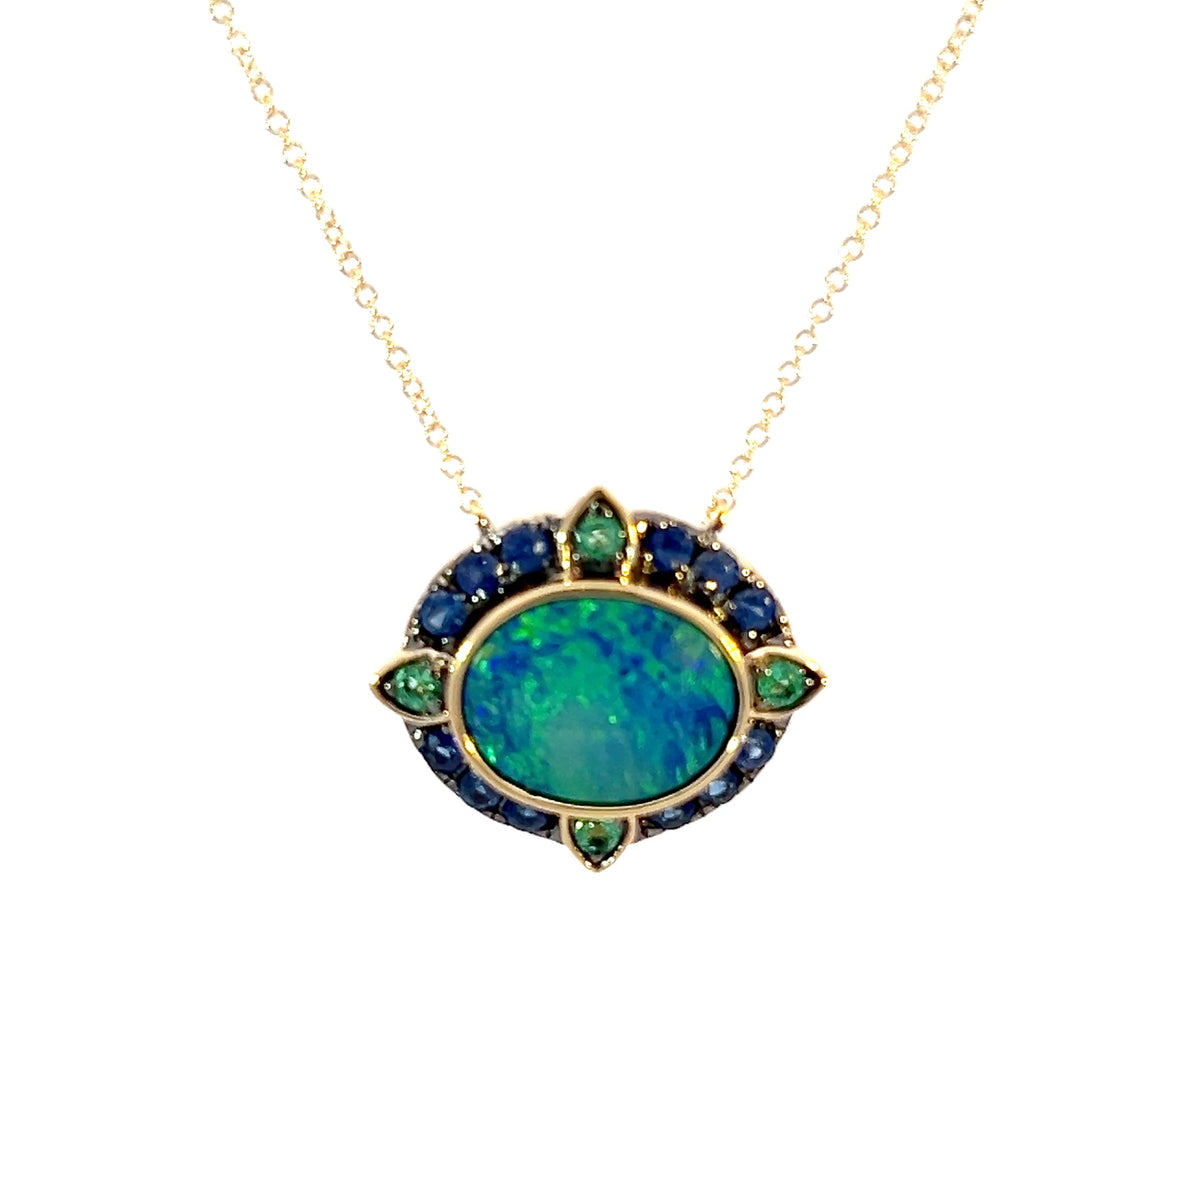 10K Yellow Gold Australian Opal Doublet with Emerald and Sapphire Halo Necklace - 18 Inches